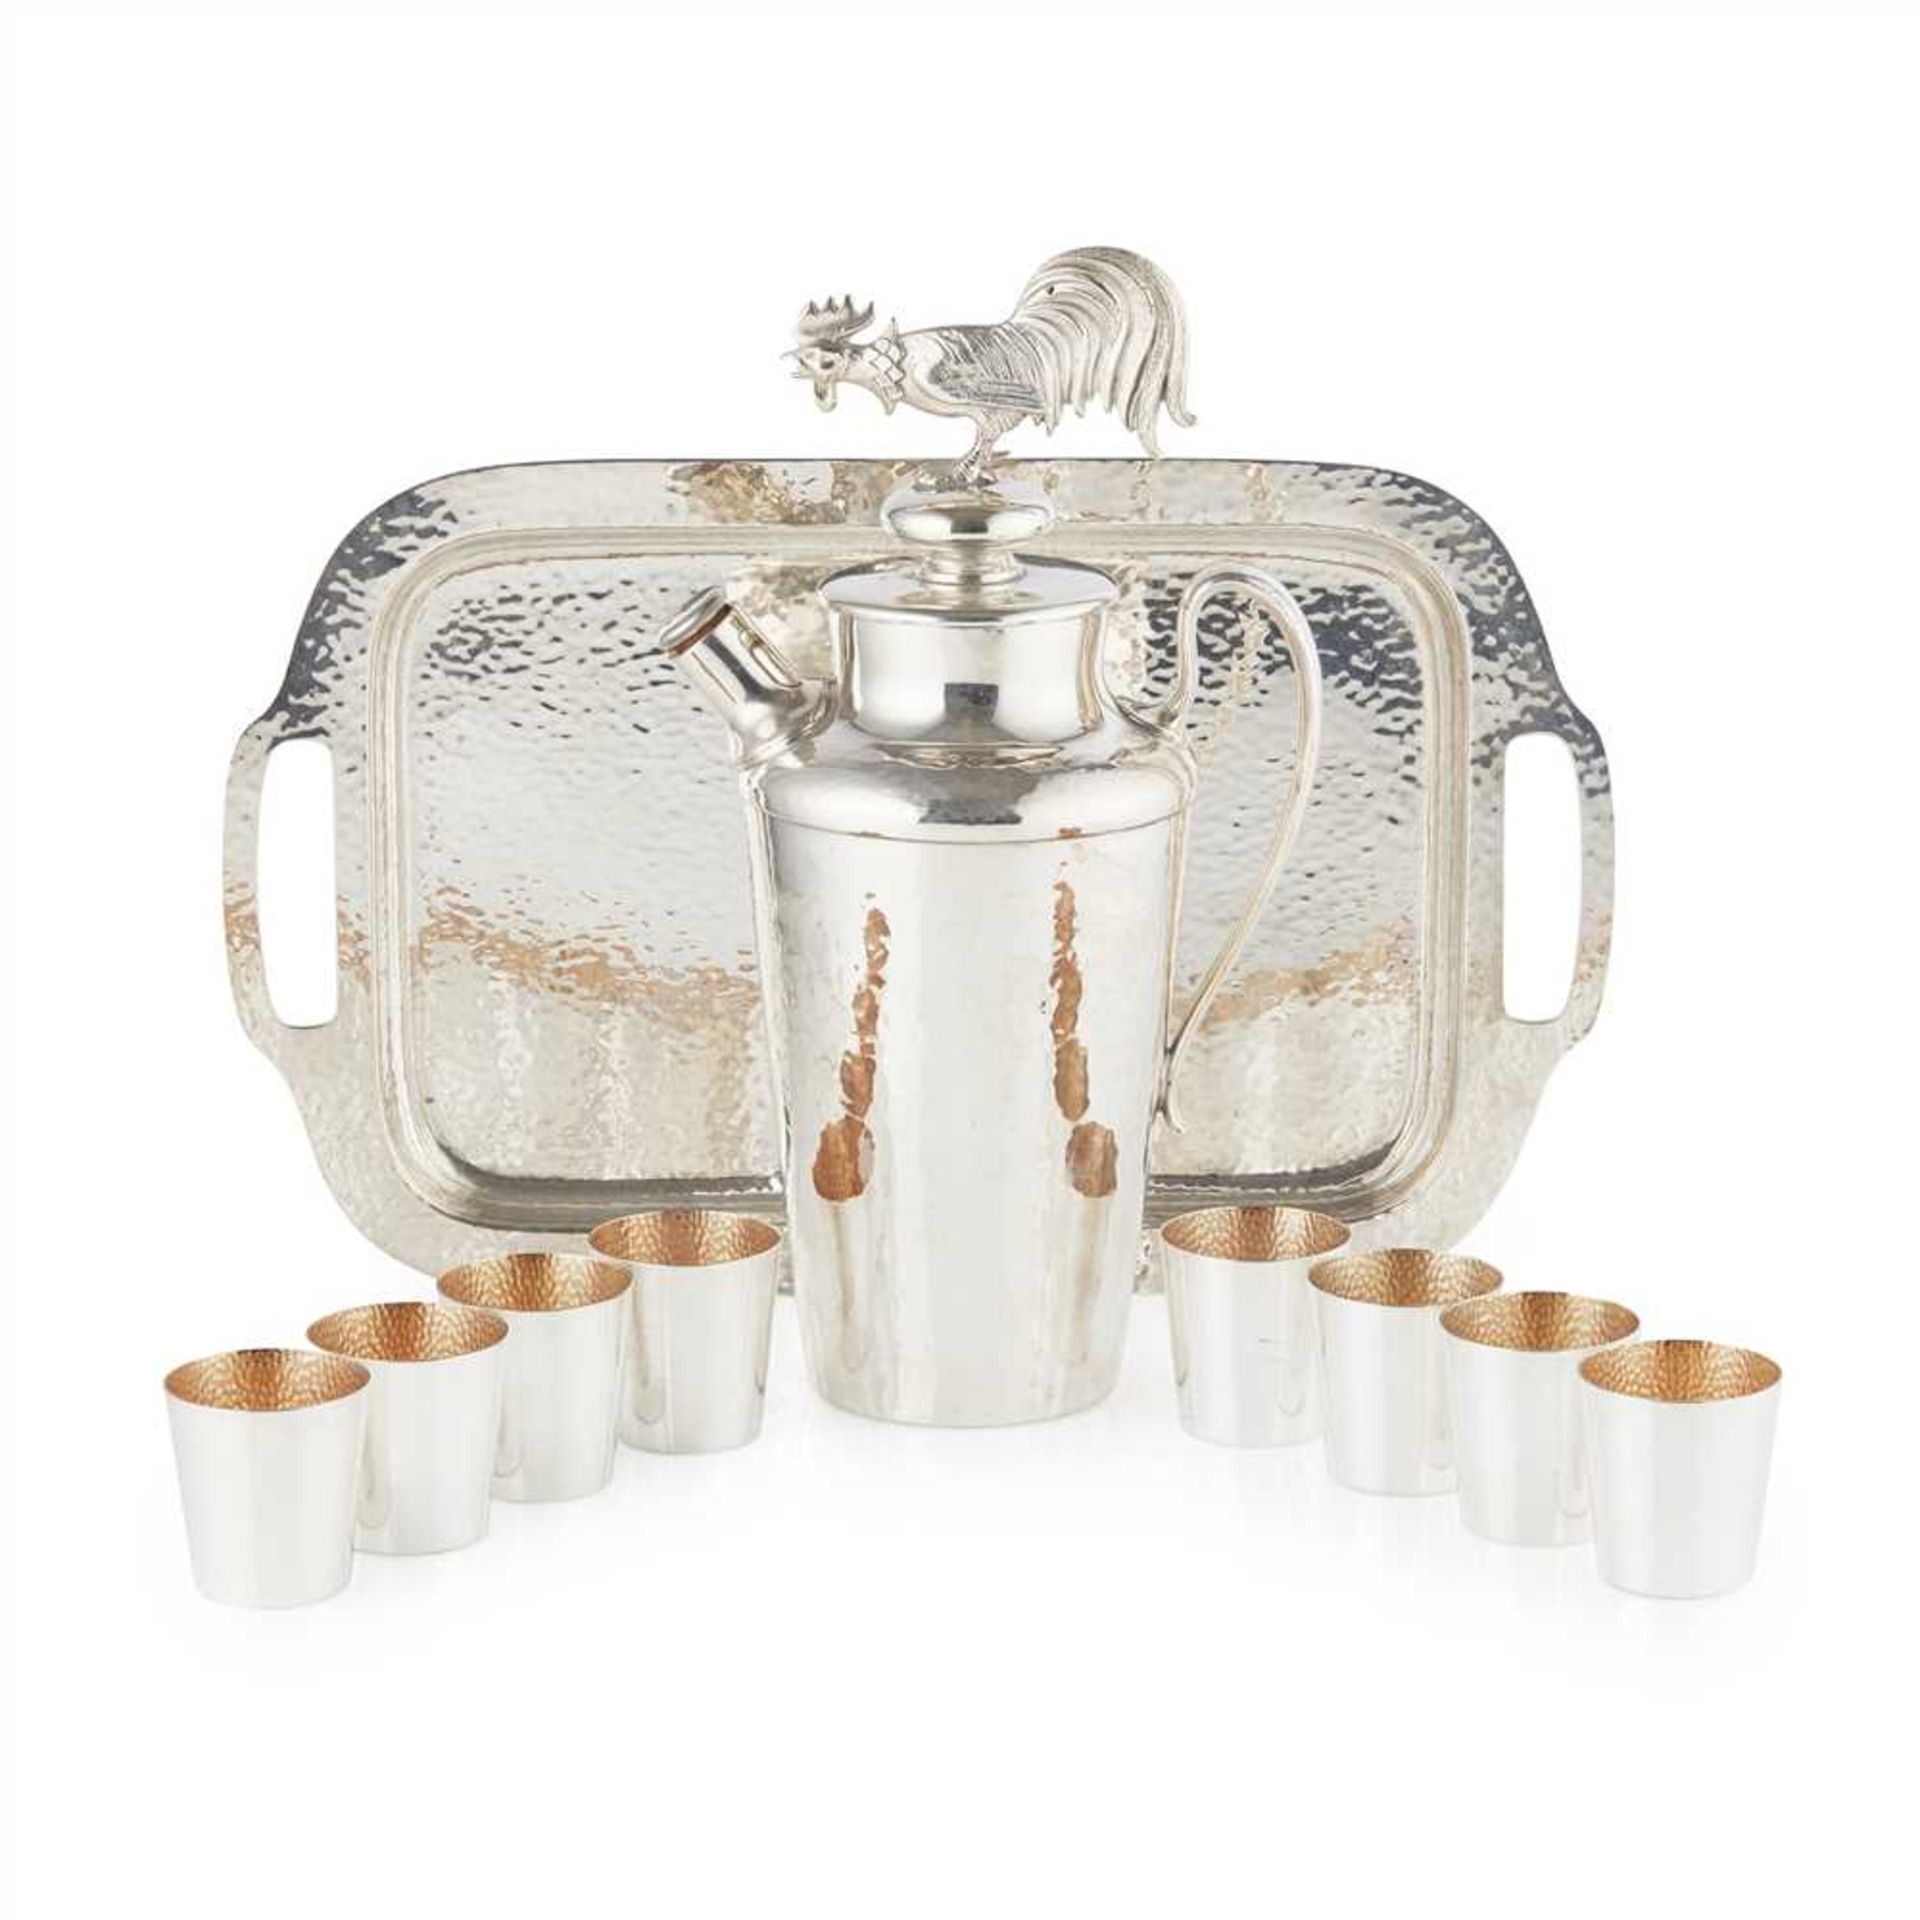 AMERICAN SILVER-PLATED COCKTAIL SET, BLACK, STARR & FROST SECOND QUARTER 20TH CENTURY